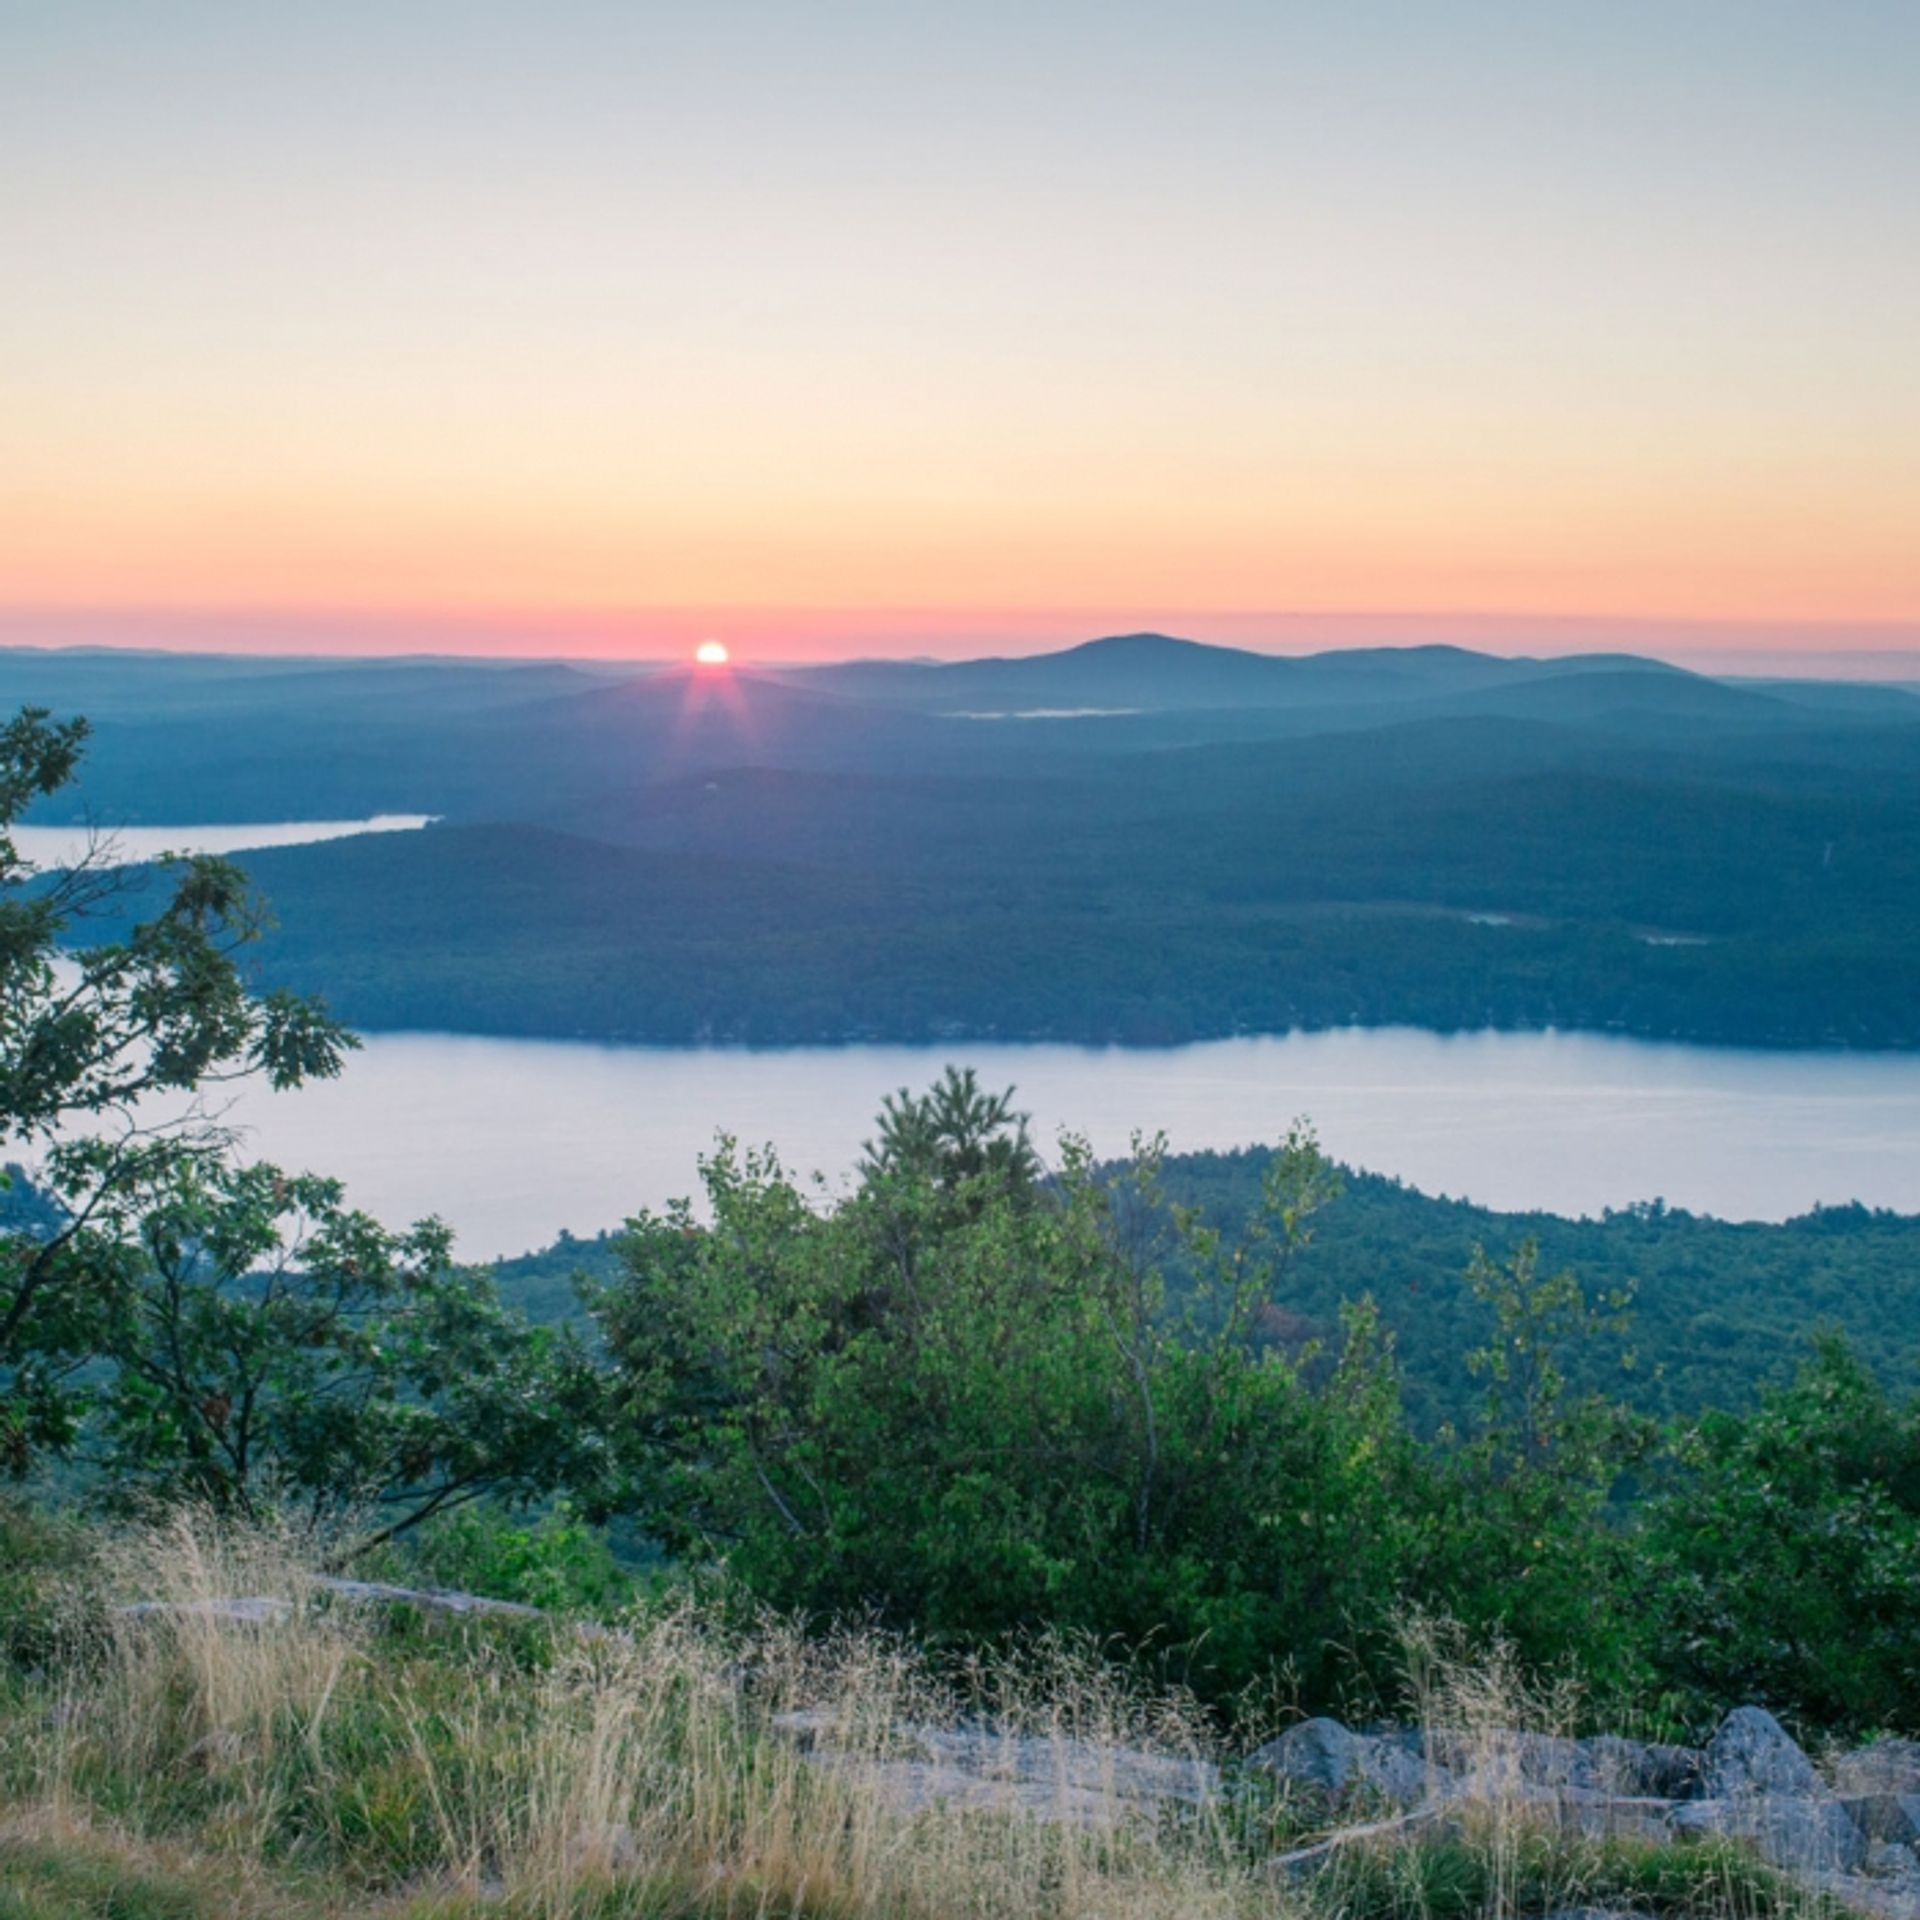 A sunset view at the summit of Mount Major.